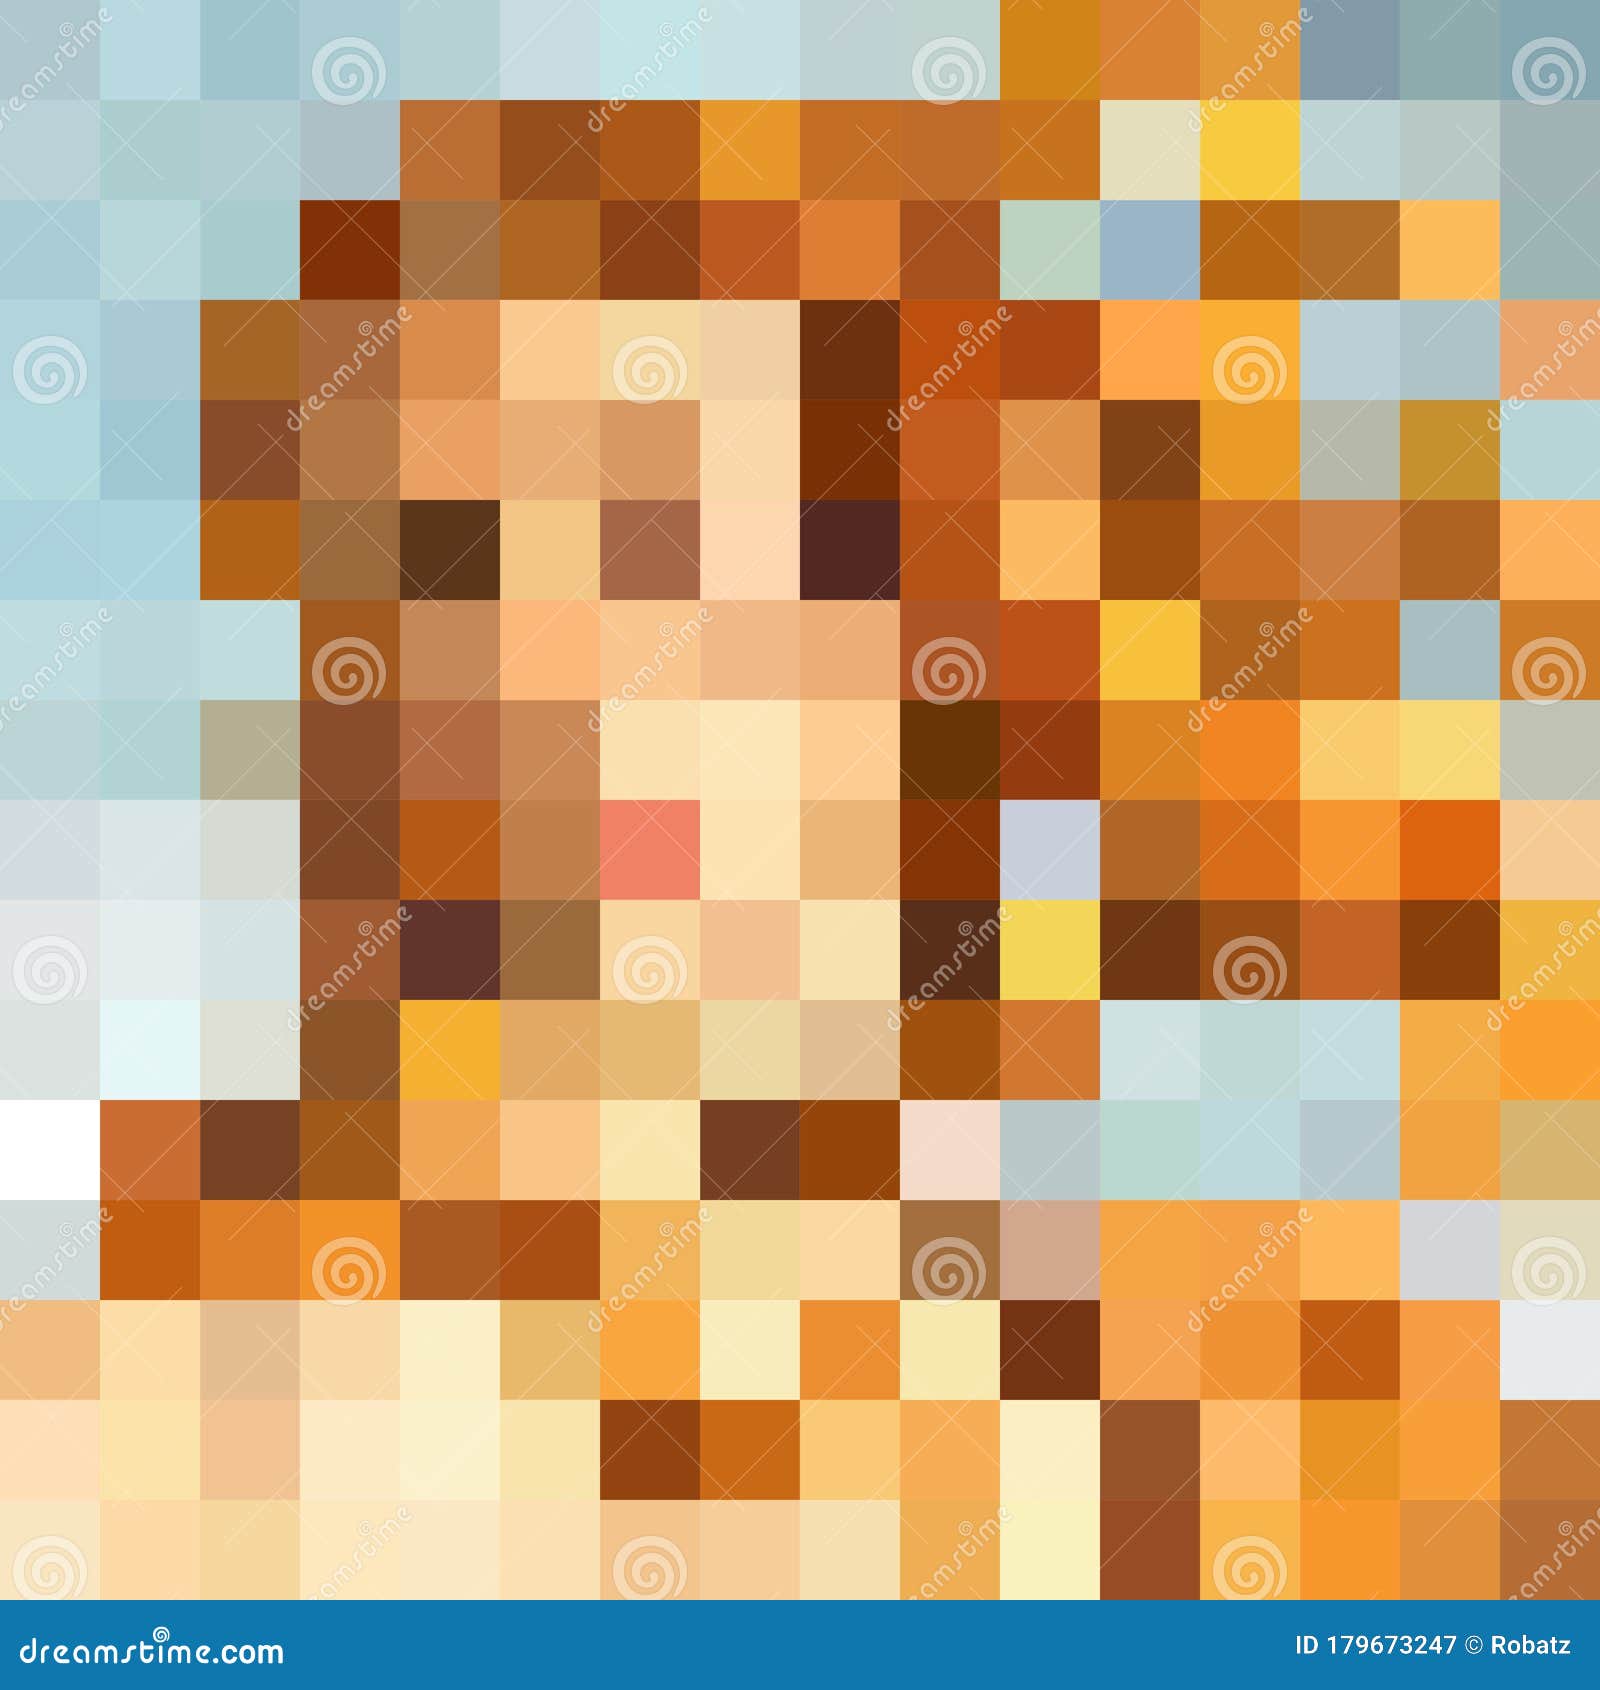 pixel art colorful abstract background. interpretation of venus, famous painting by sandro botticelli. modern  